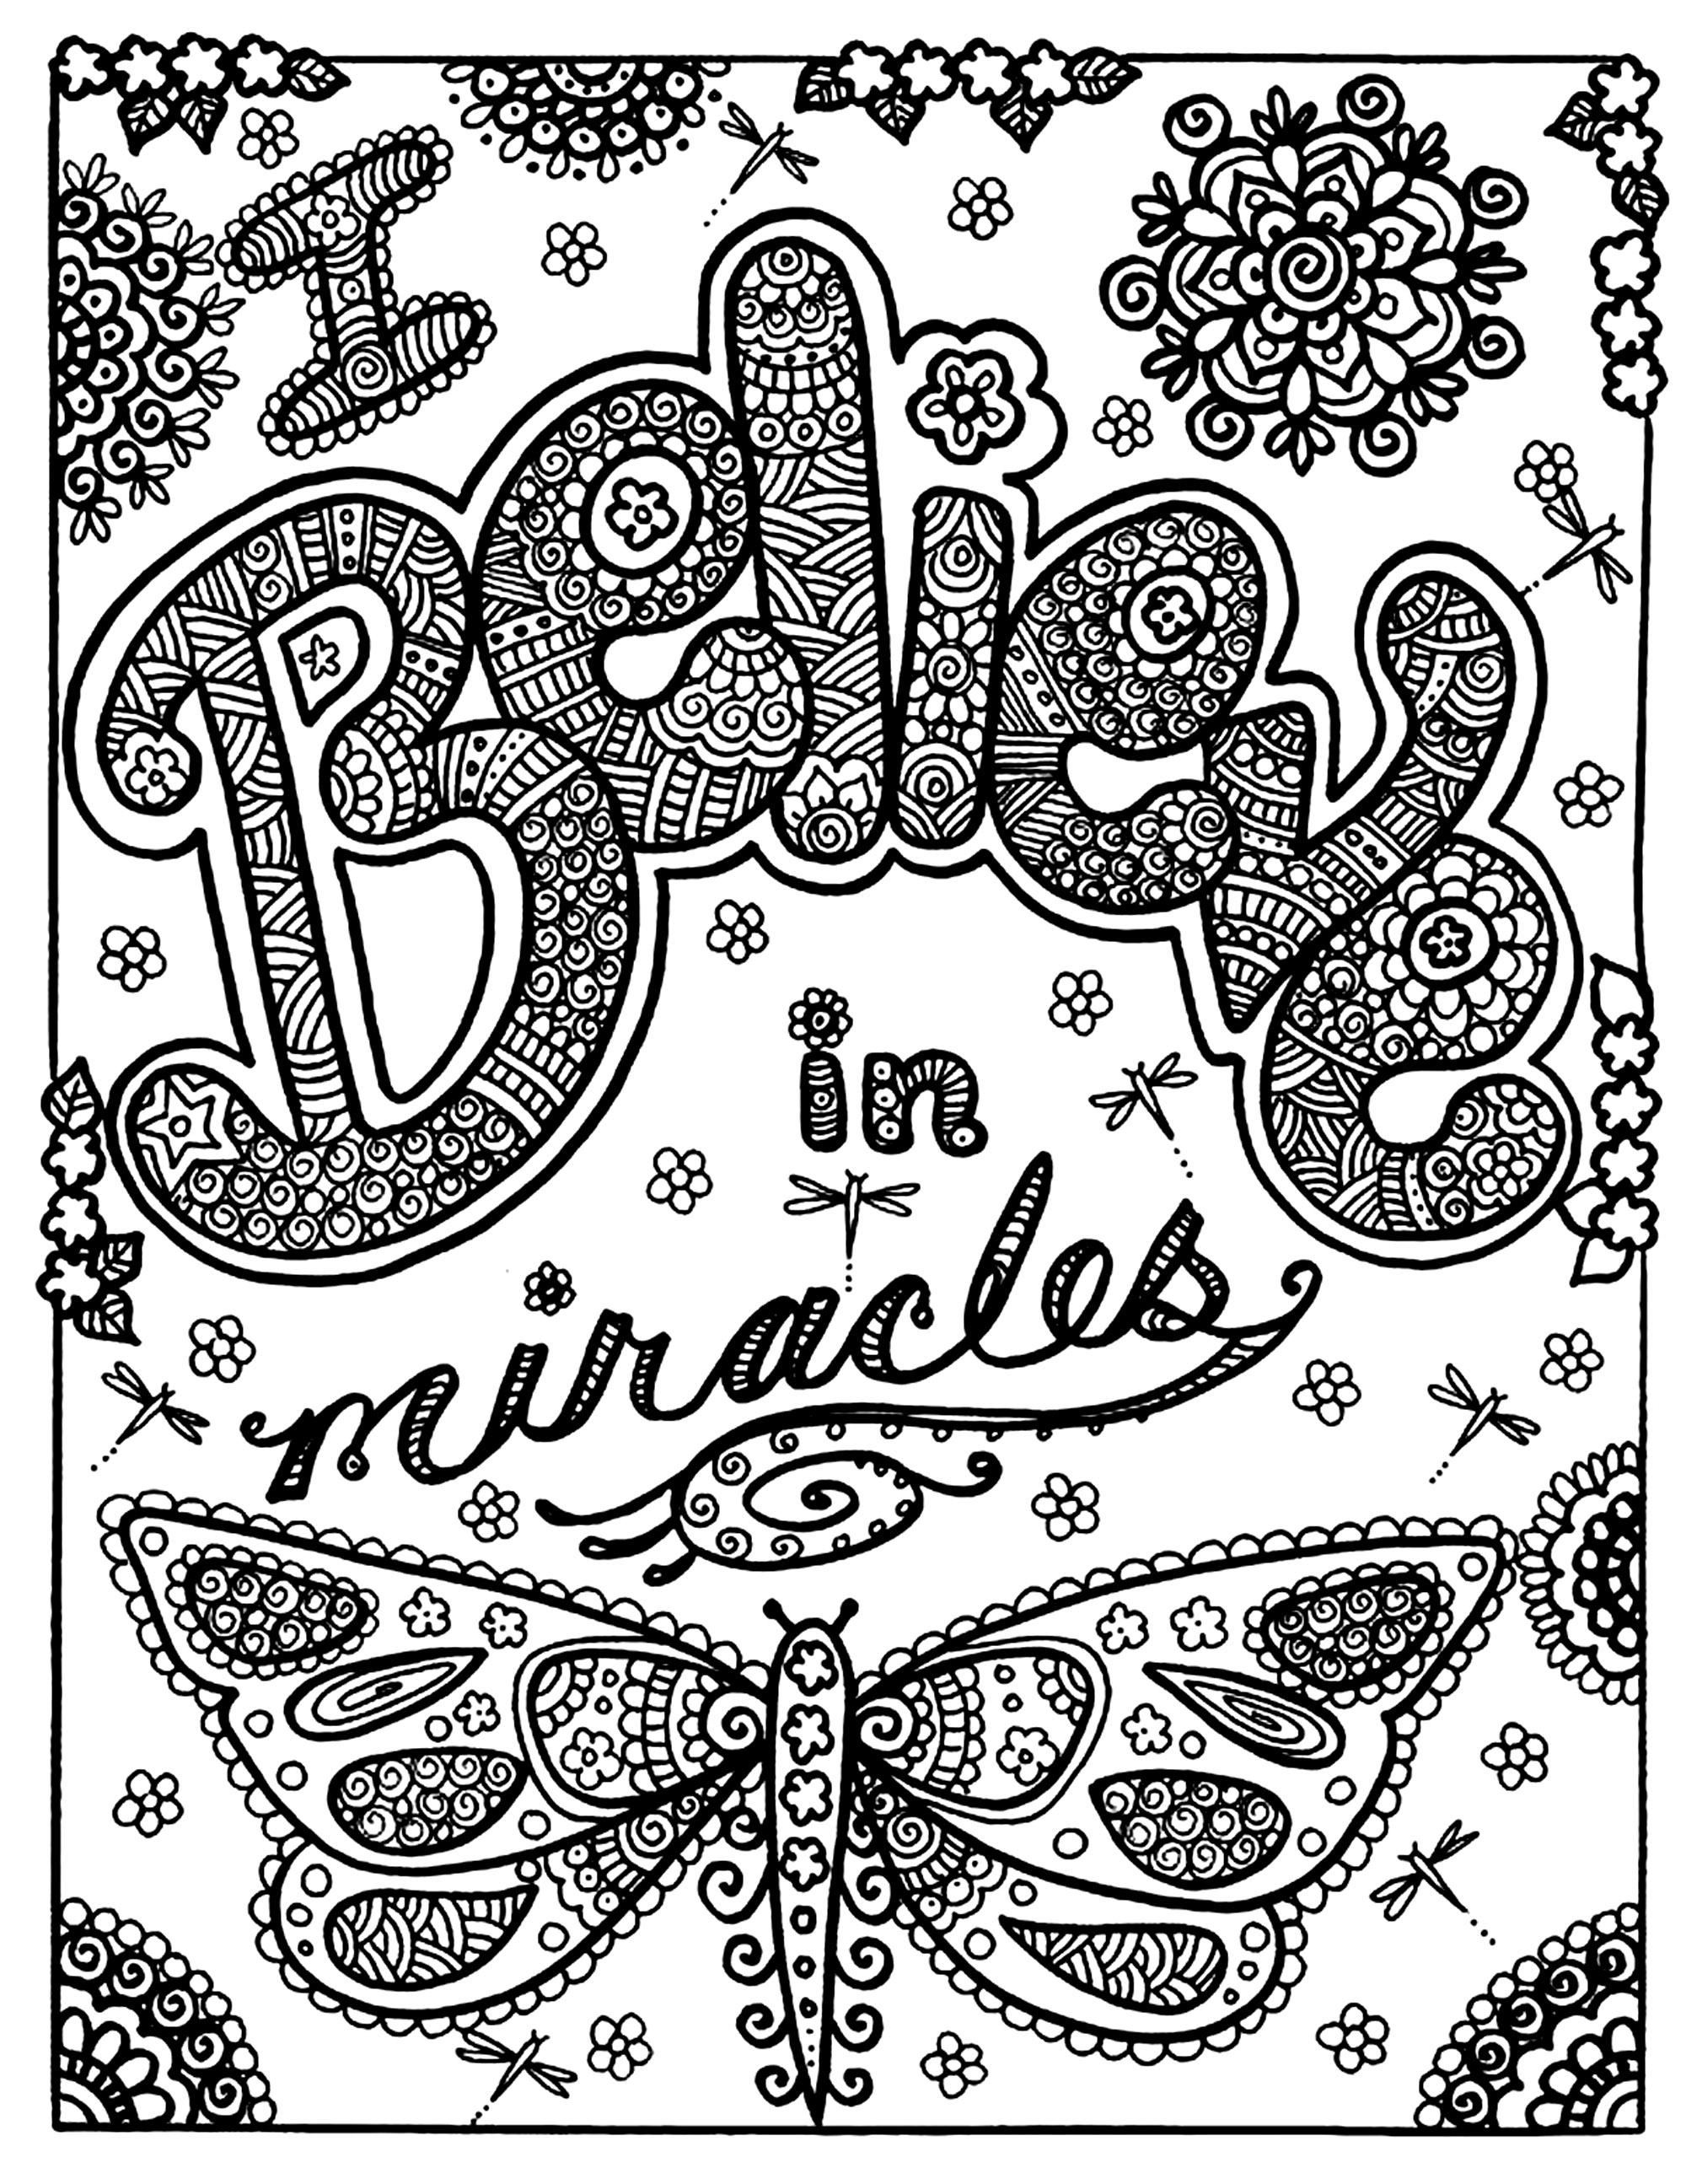 butterfly-miracle-butterflies-insects-adult-coloring-pages-page-2